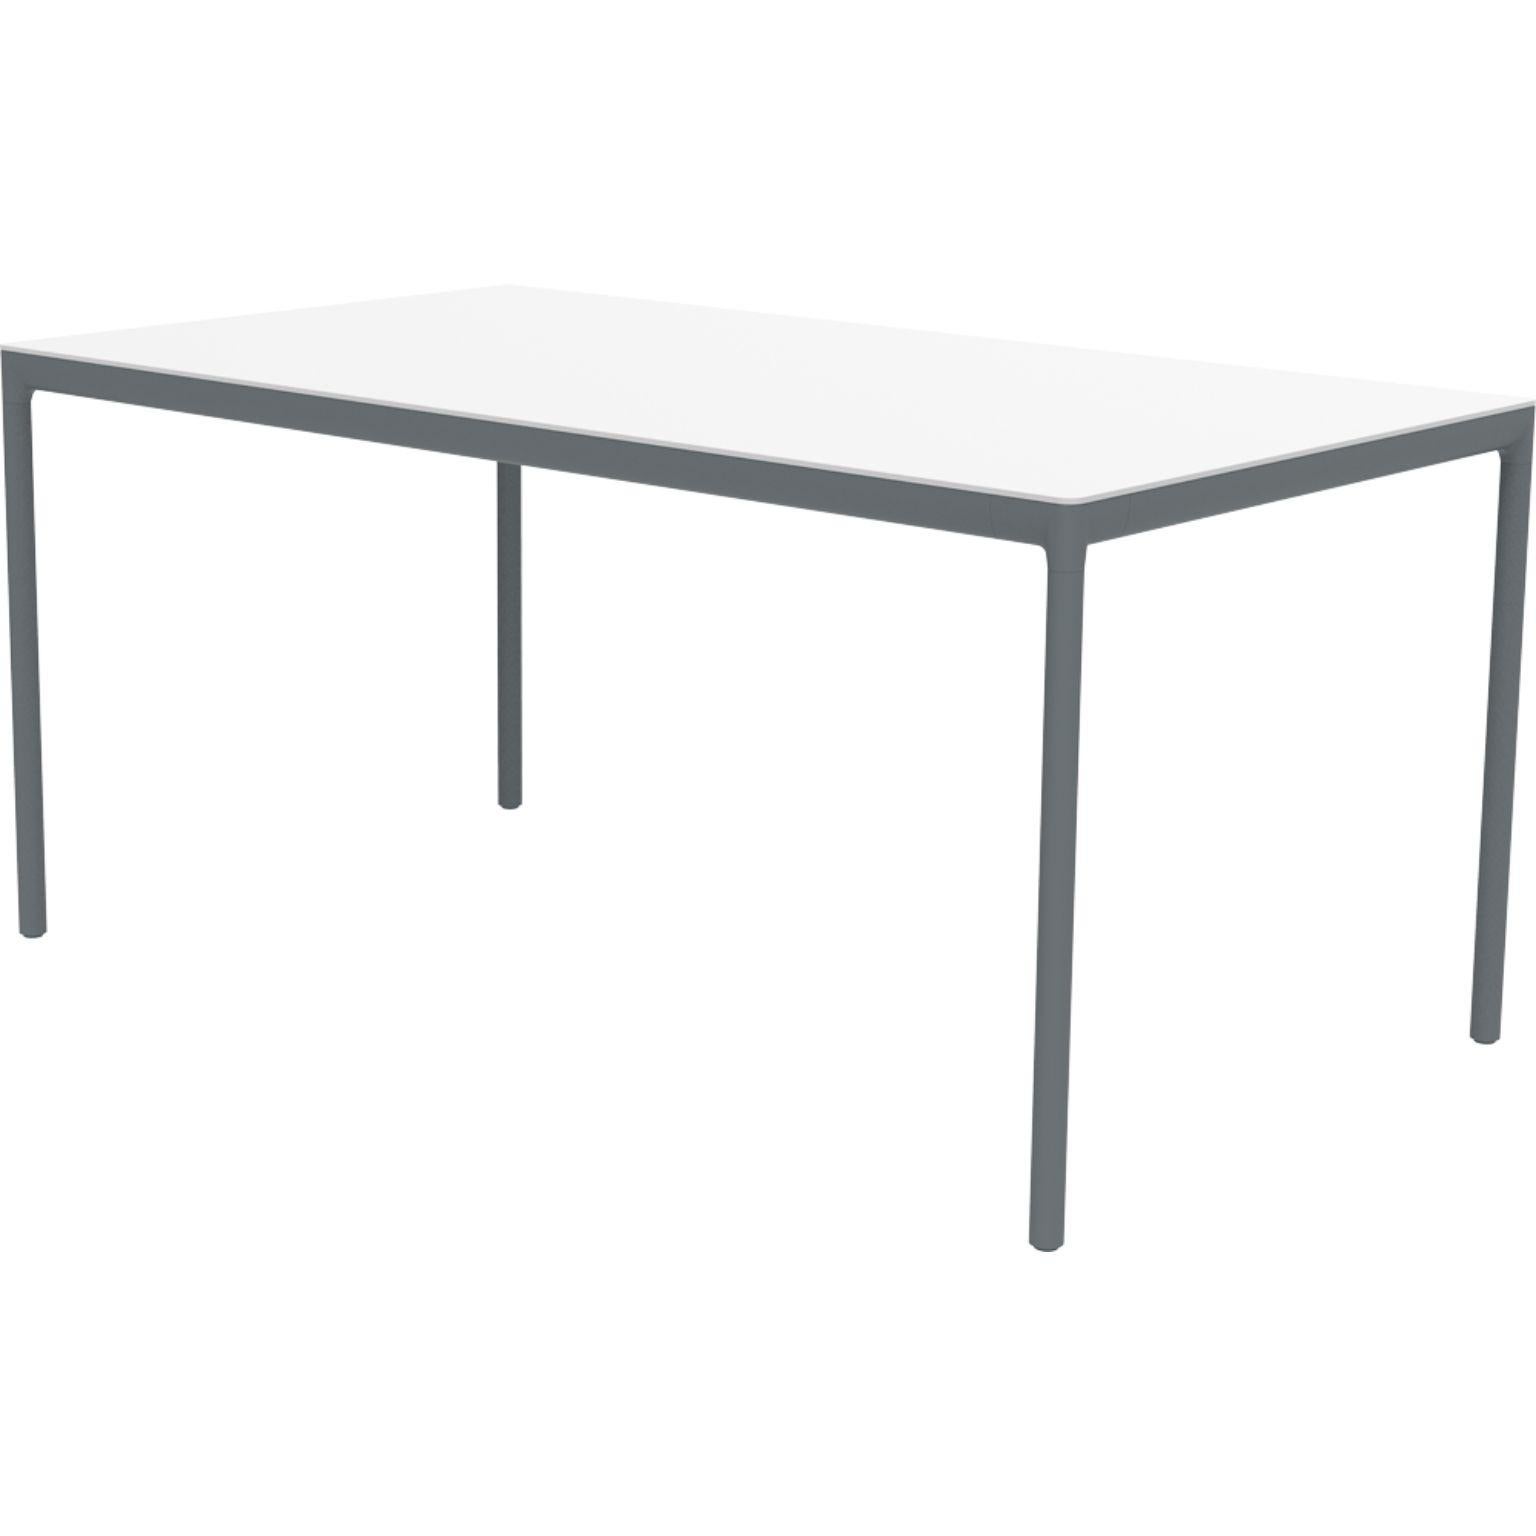 Ribbons grey 160 coffee table by MOWEE
Dimensions: D90 x W160 x H75 cm
Material: Aluminum and HPL top.
Weight: 21 kg.
Also available in different colors and finishes. (HPL Black Edge or Neolith top).

An unmistakable collection for its beauty